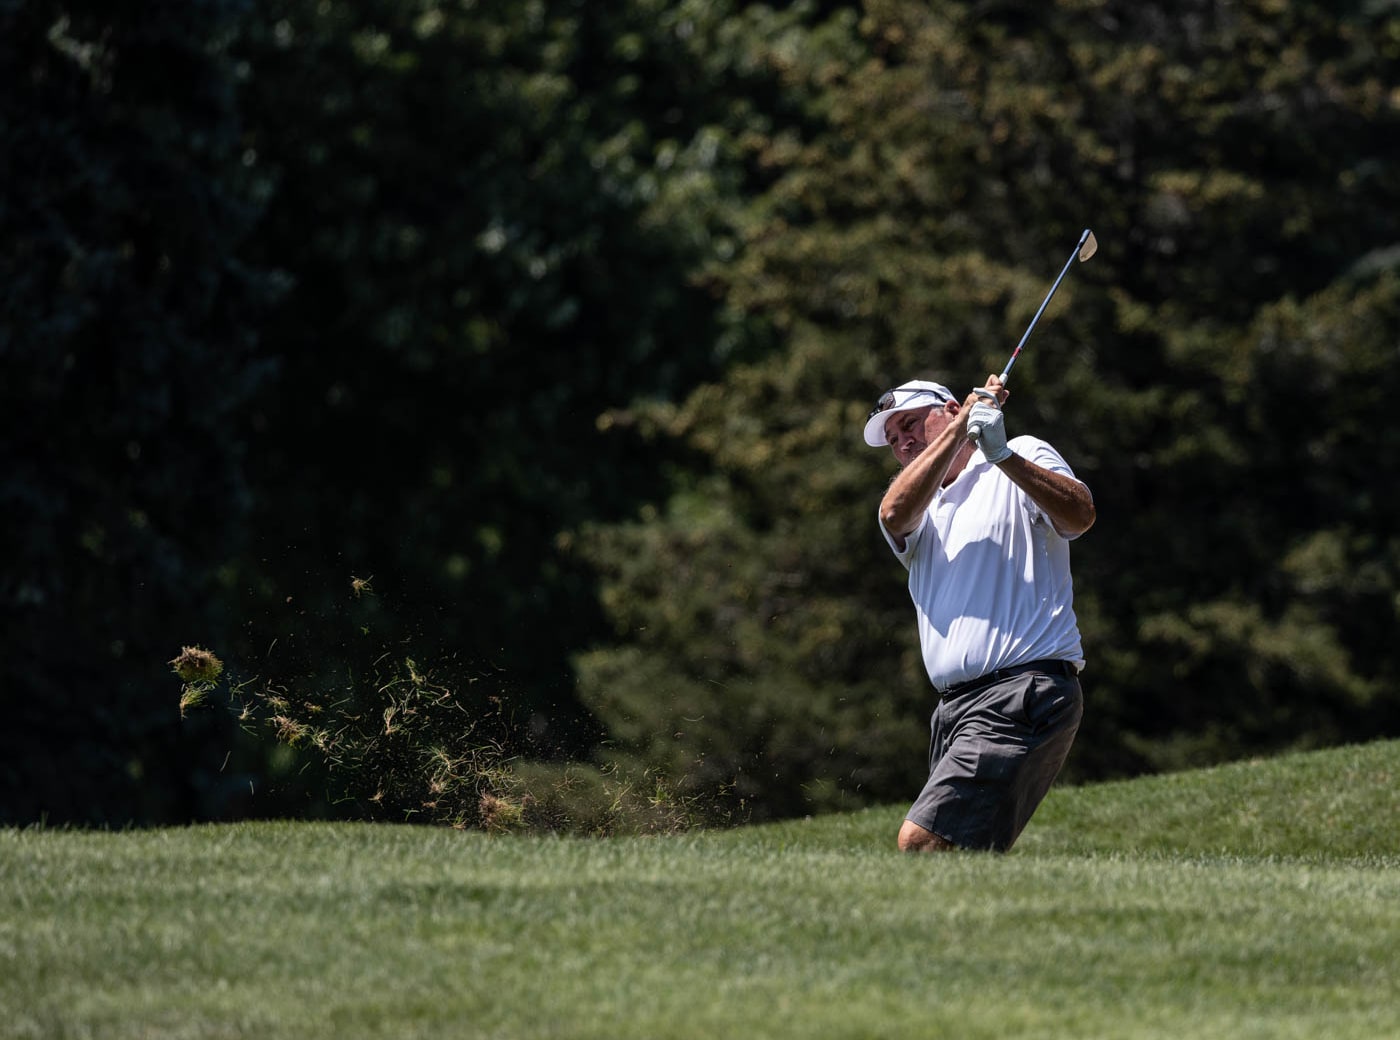 Country-Club-Of-New-Bedford FB-2023-Mens-FB-Gallery August-2023-Country-Club-Of-New-Bedford-FB-2023-Mens-FB-Gallery August-2023-Mens-FB-Gallery-Sat-Photos-Image-8